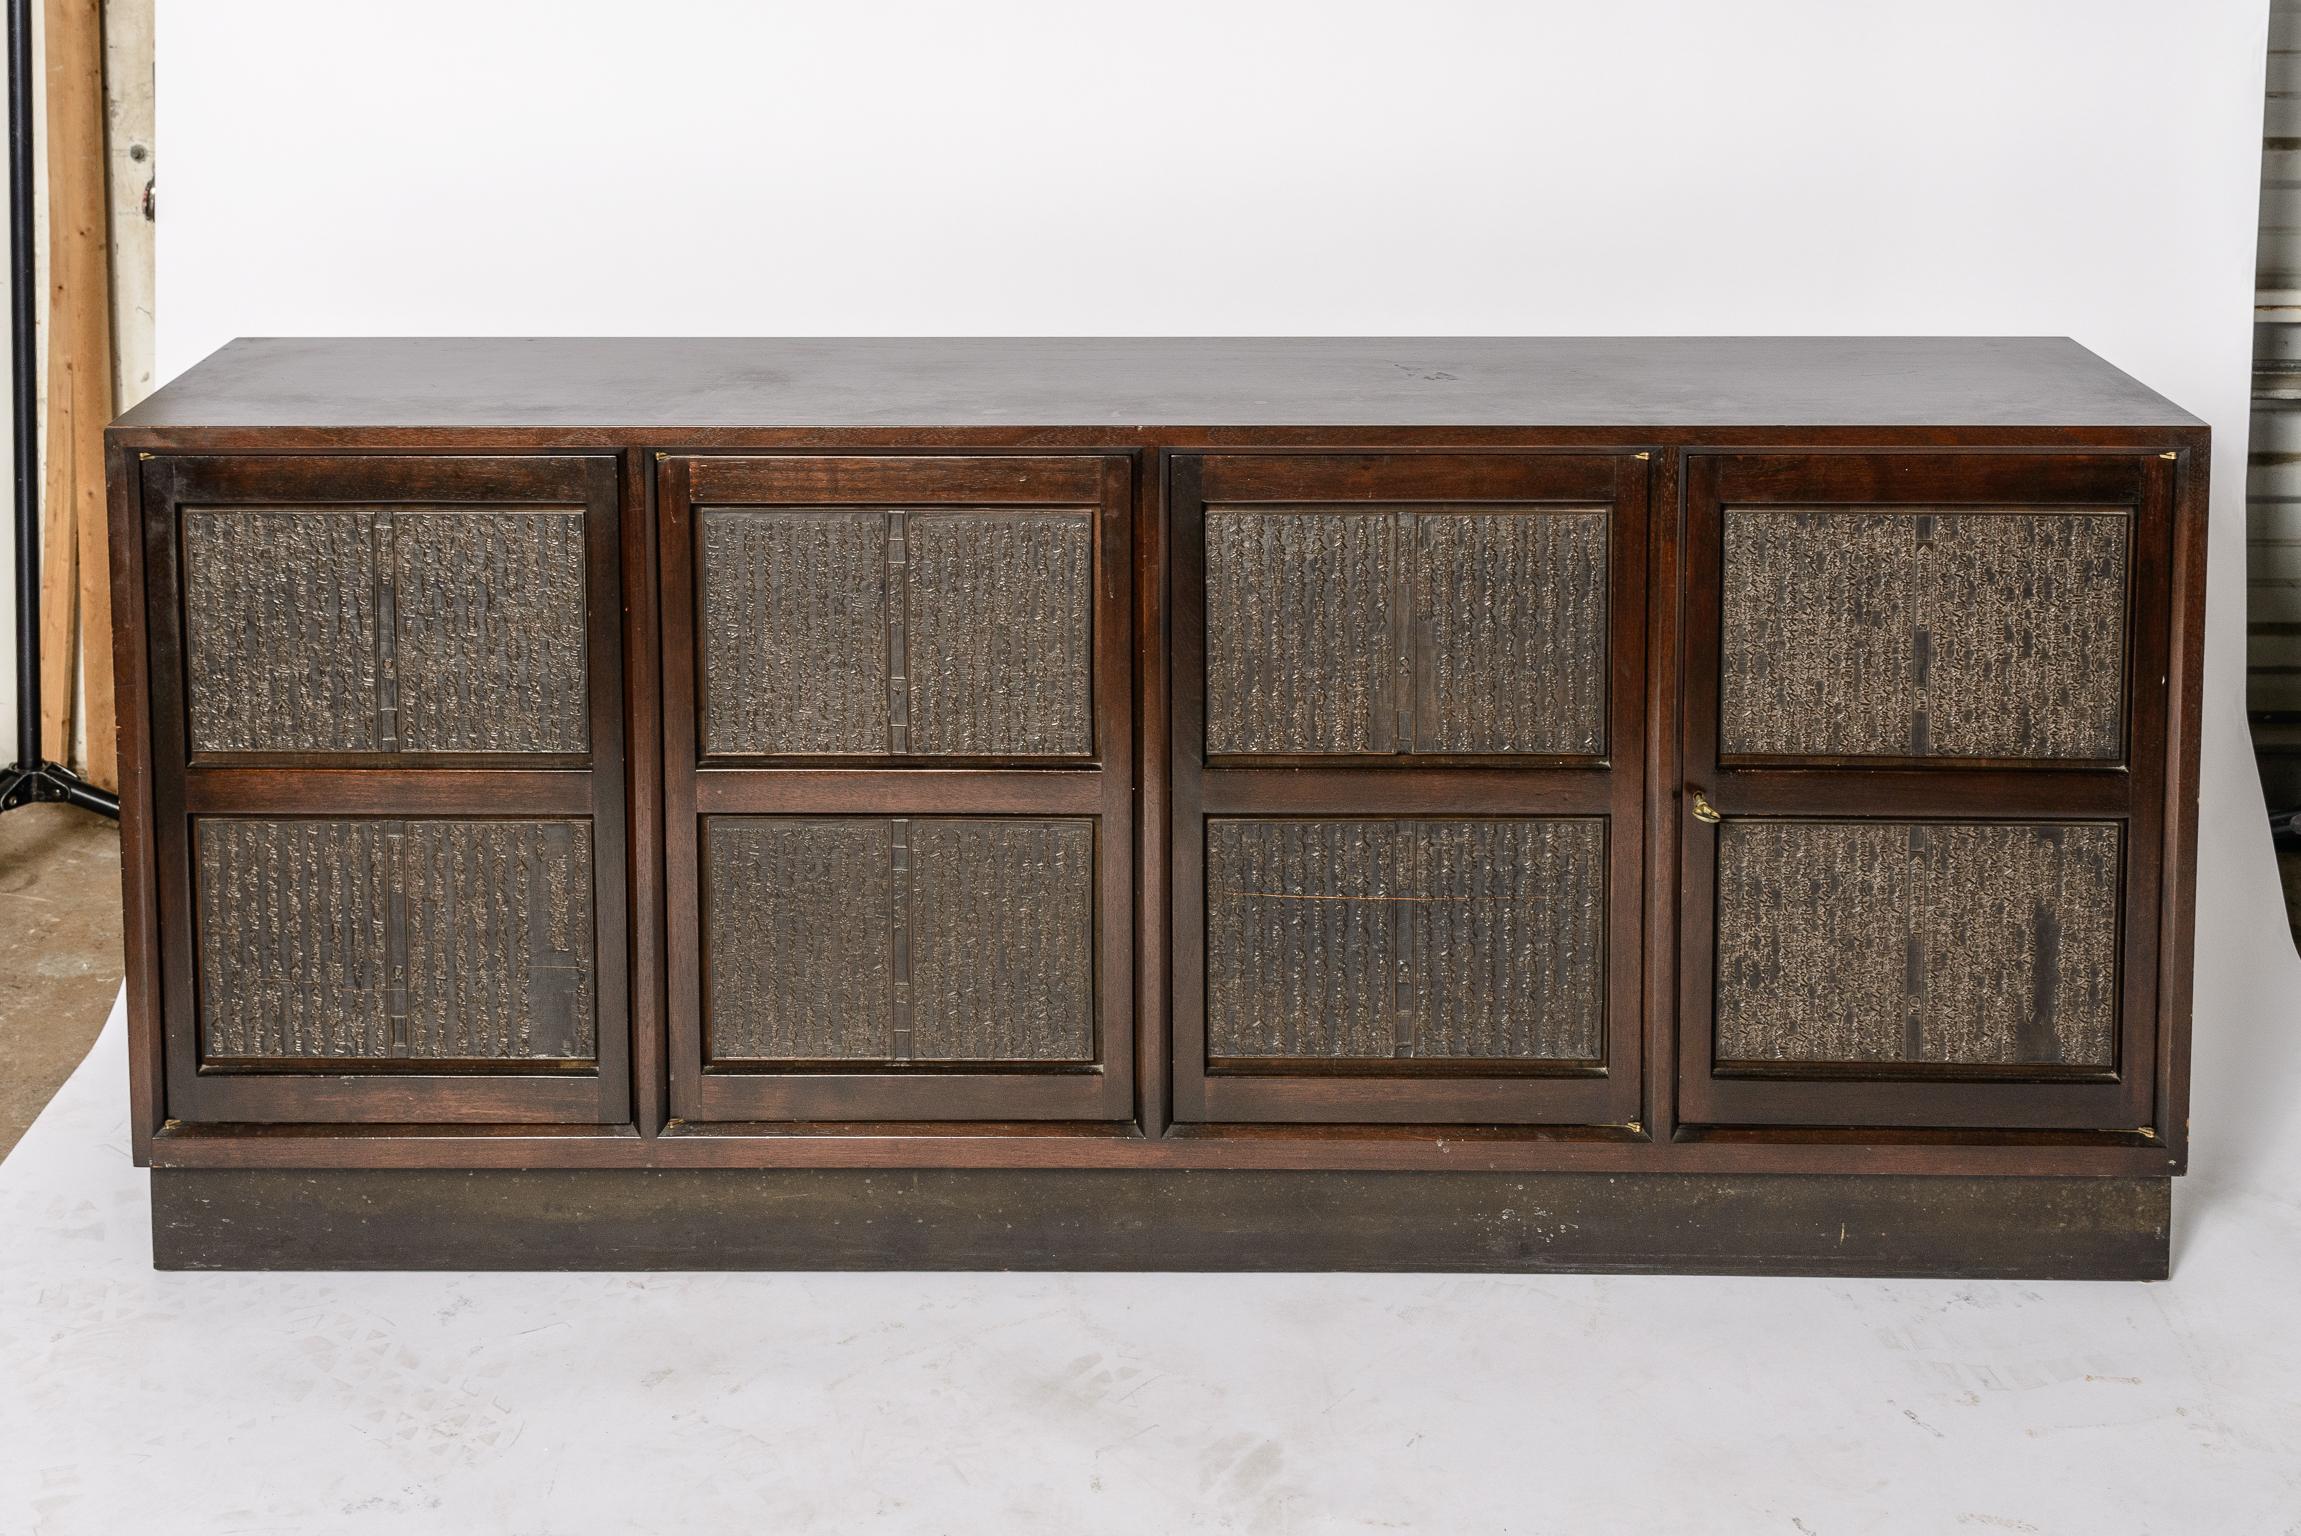 A wonderful example from Mr. Wormley's most prolific period.
A walnut case surrounds 4 doors highlighted with Antique Japanese Printers Blocks.
Hand carved in Rosewood.
Manufacturer's label on rear of cabinet.
Copy of original invoice available.
